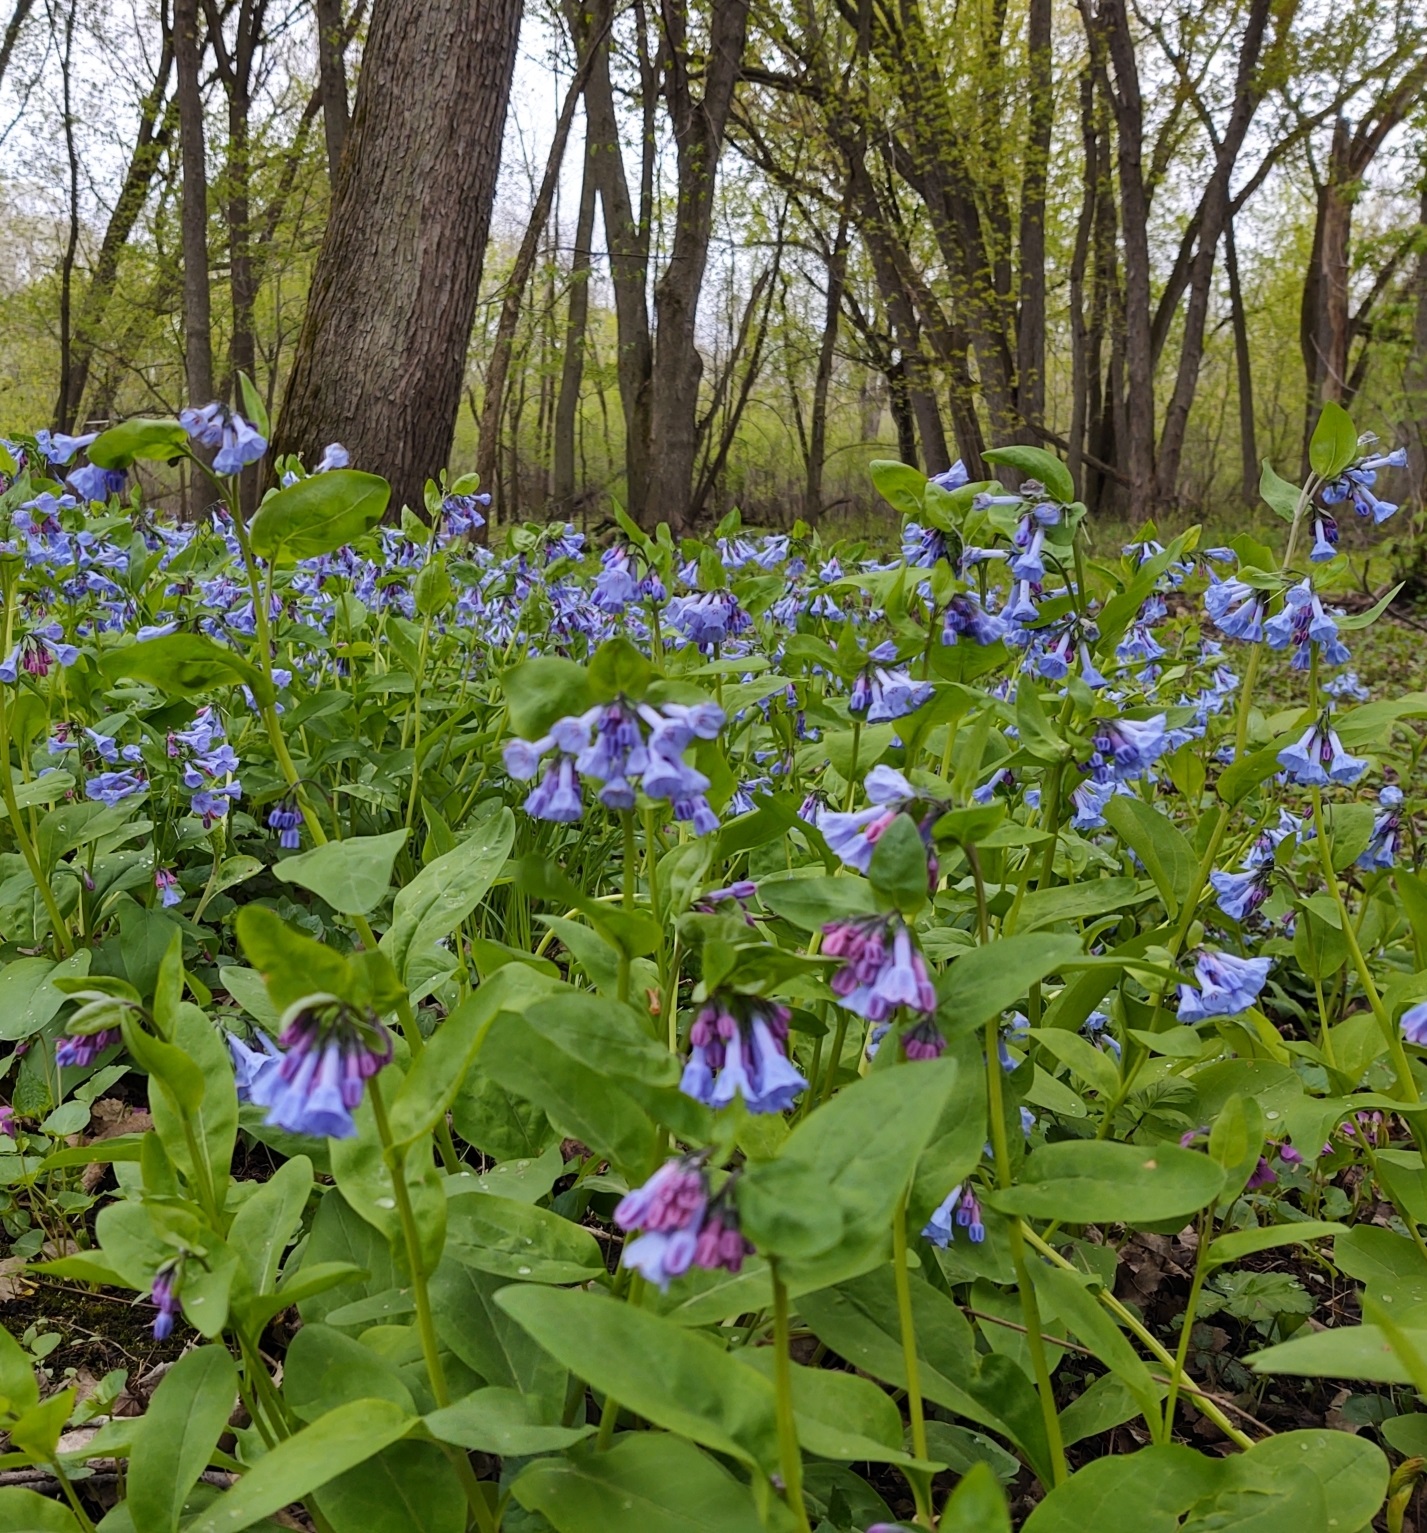 Forest floor covered with Virginia bluebells. The small, nodding, trumpet-shaped flowers are violet-blue.